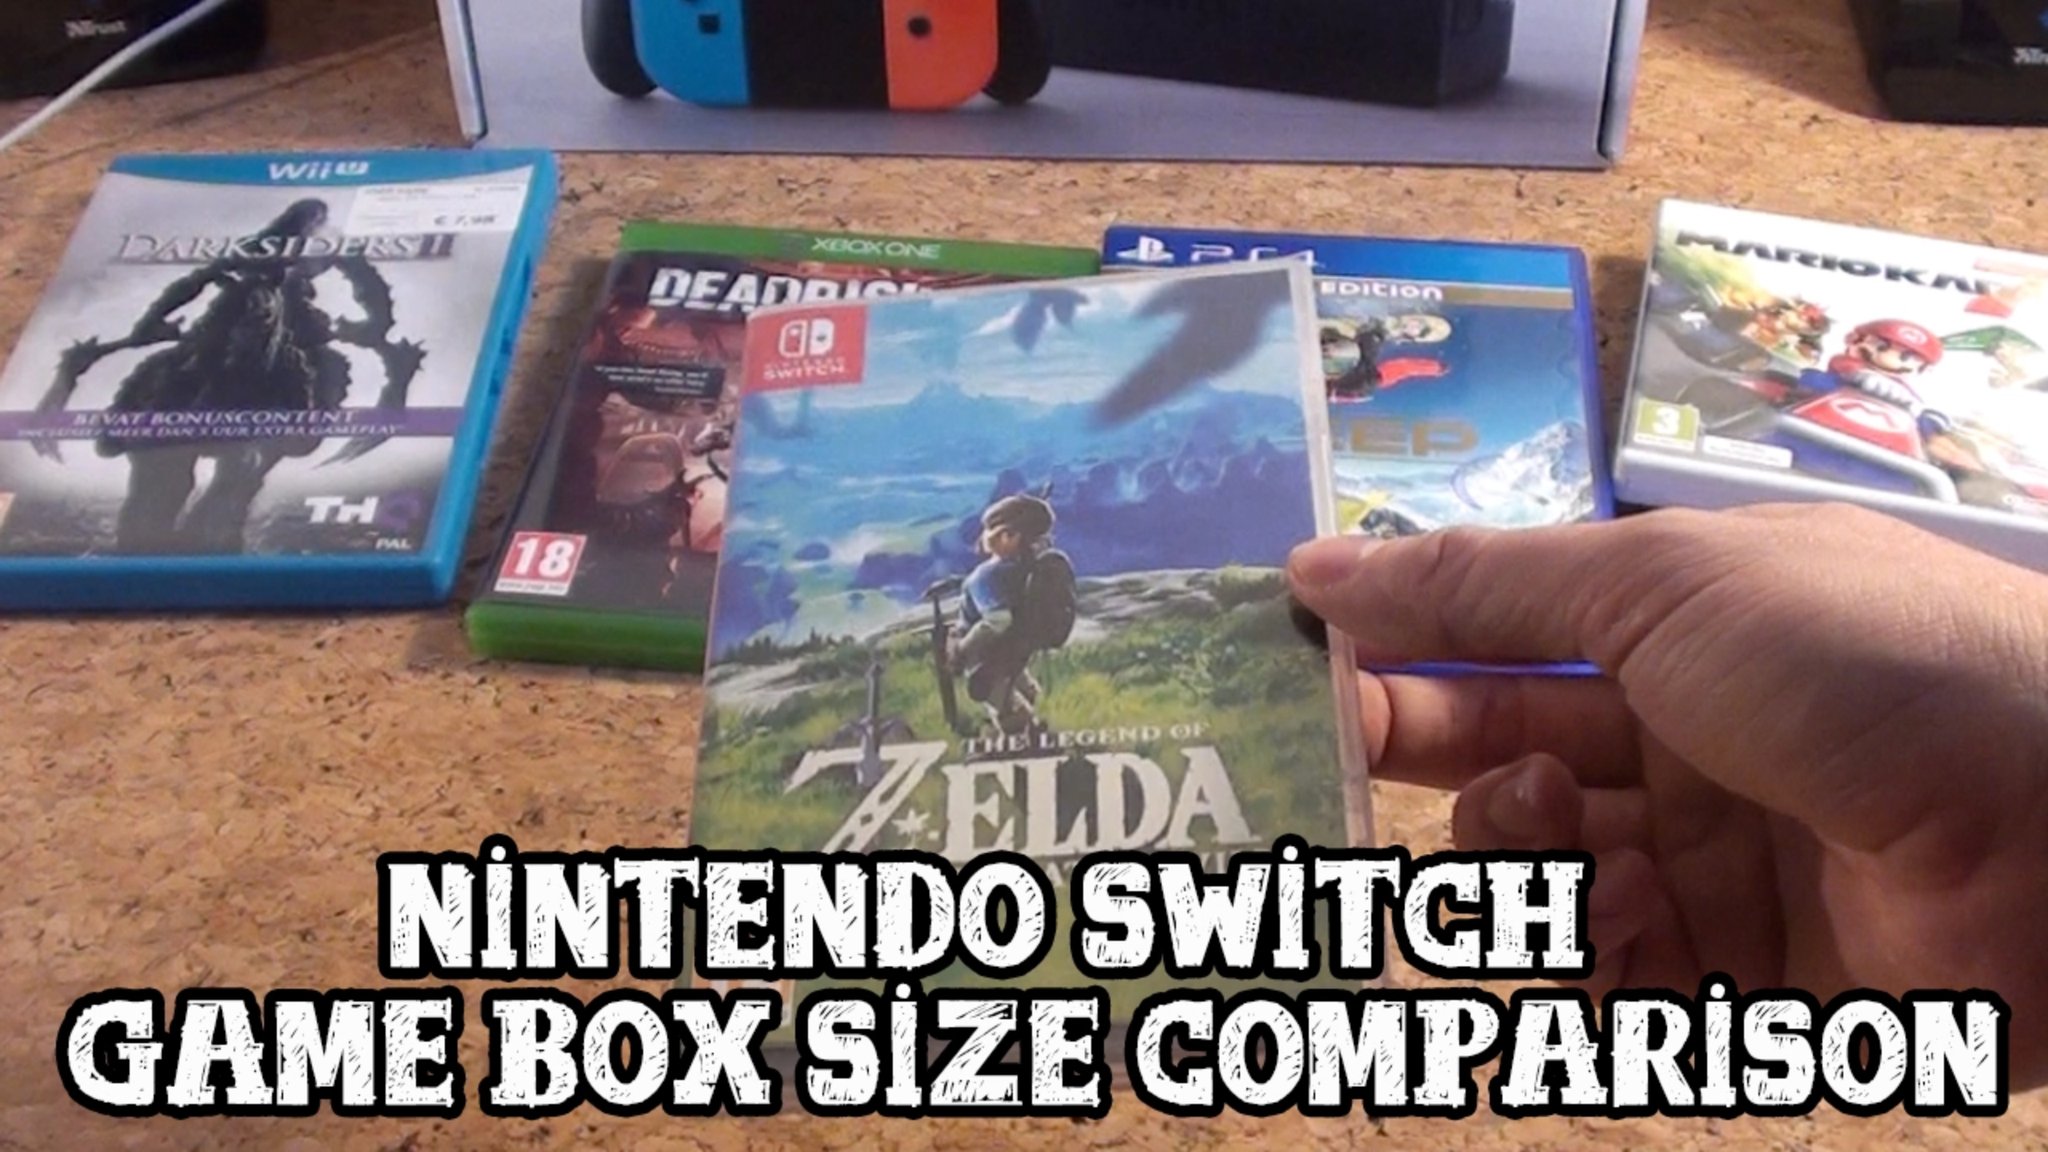 Bedrag Mark Dele Nintendo Switch 🍥 on Twitter: "「Video」 #NintendoSwitch game box size and  comparison →https://t.co/UUdsHPwa4S (via @GamingBoulevard)  https://t.co/qbzhHqNPHS" / Twitter